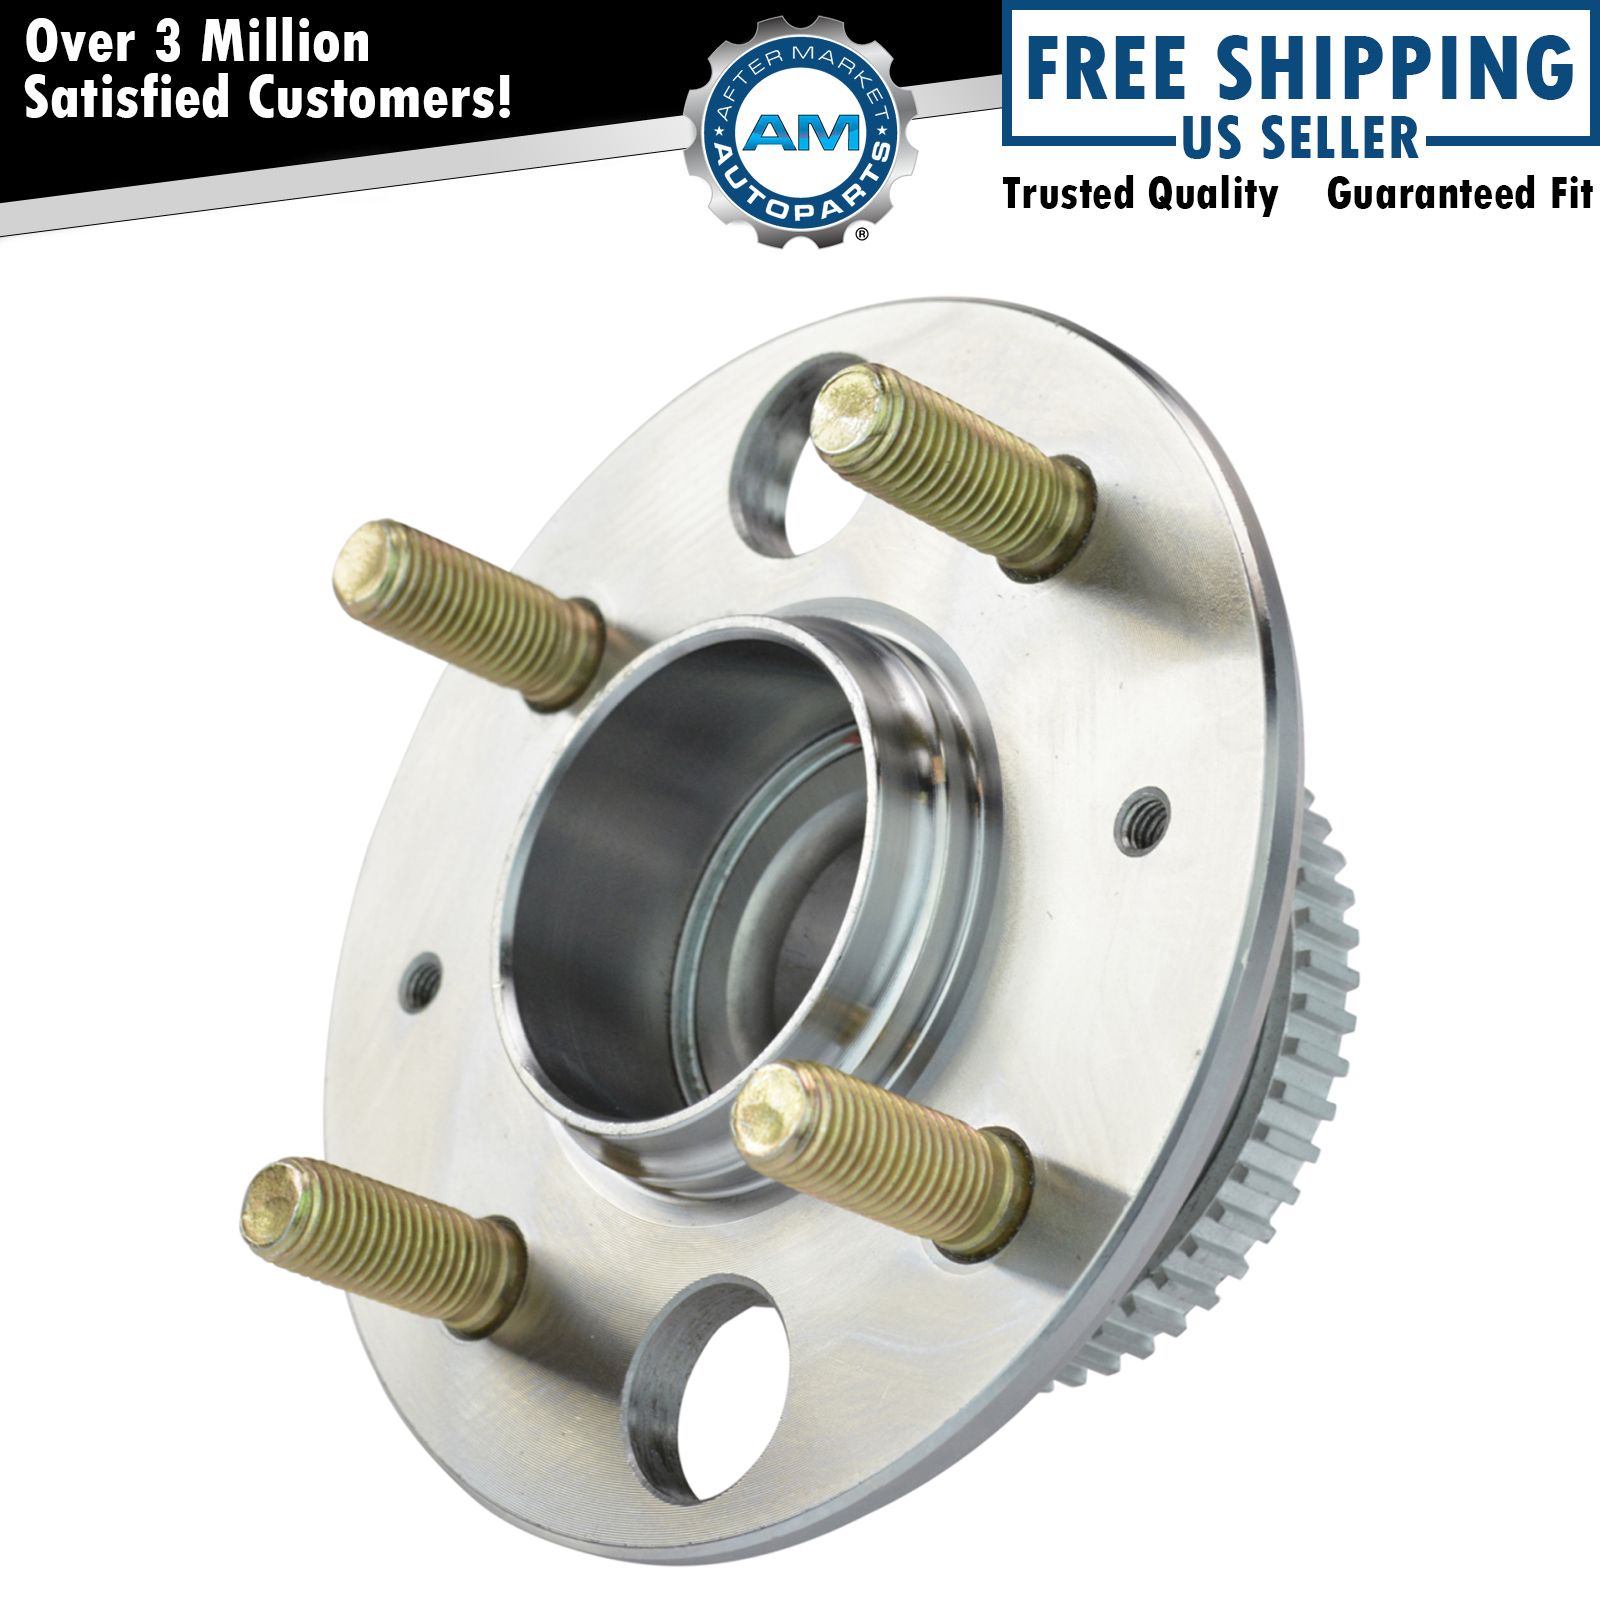 Rear Wheel Hub & Bearing Assembly for Acura Civic Integra Del Sol w/ ABS